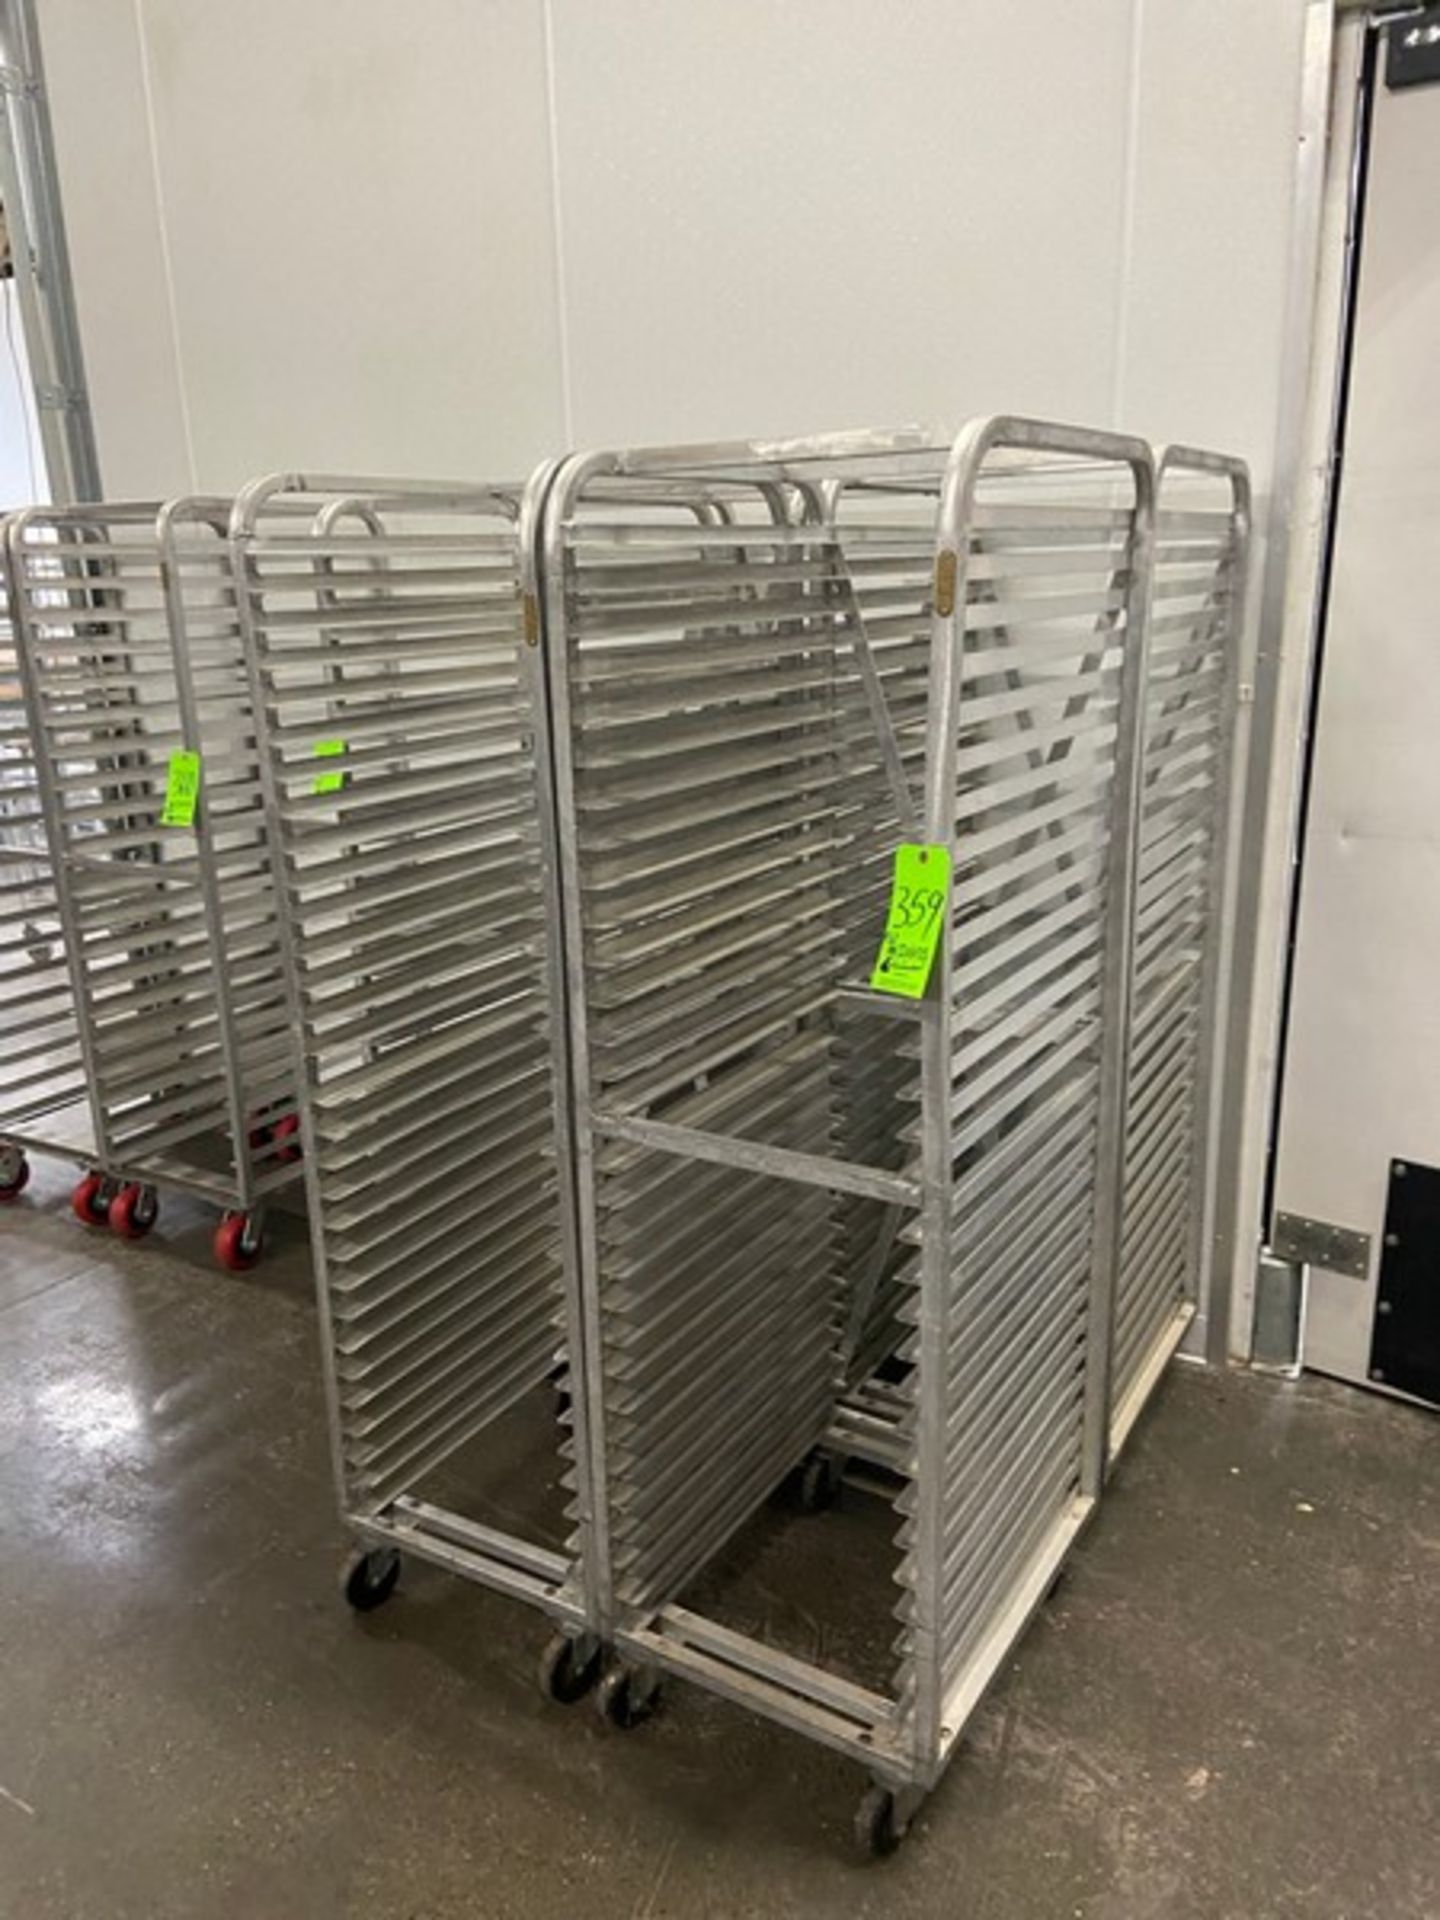 (5) ALUMINUM BAKERY RACKS, MOUNTED ON CASTERS (LOCATED IN CALLERY, PA) - Image 2 of 2